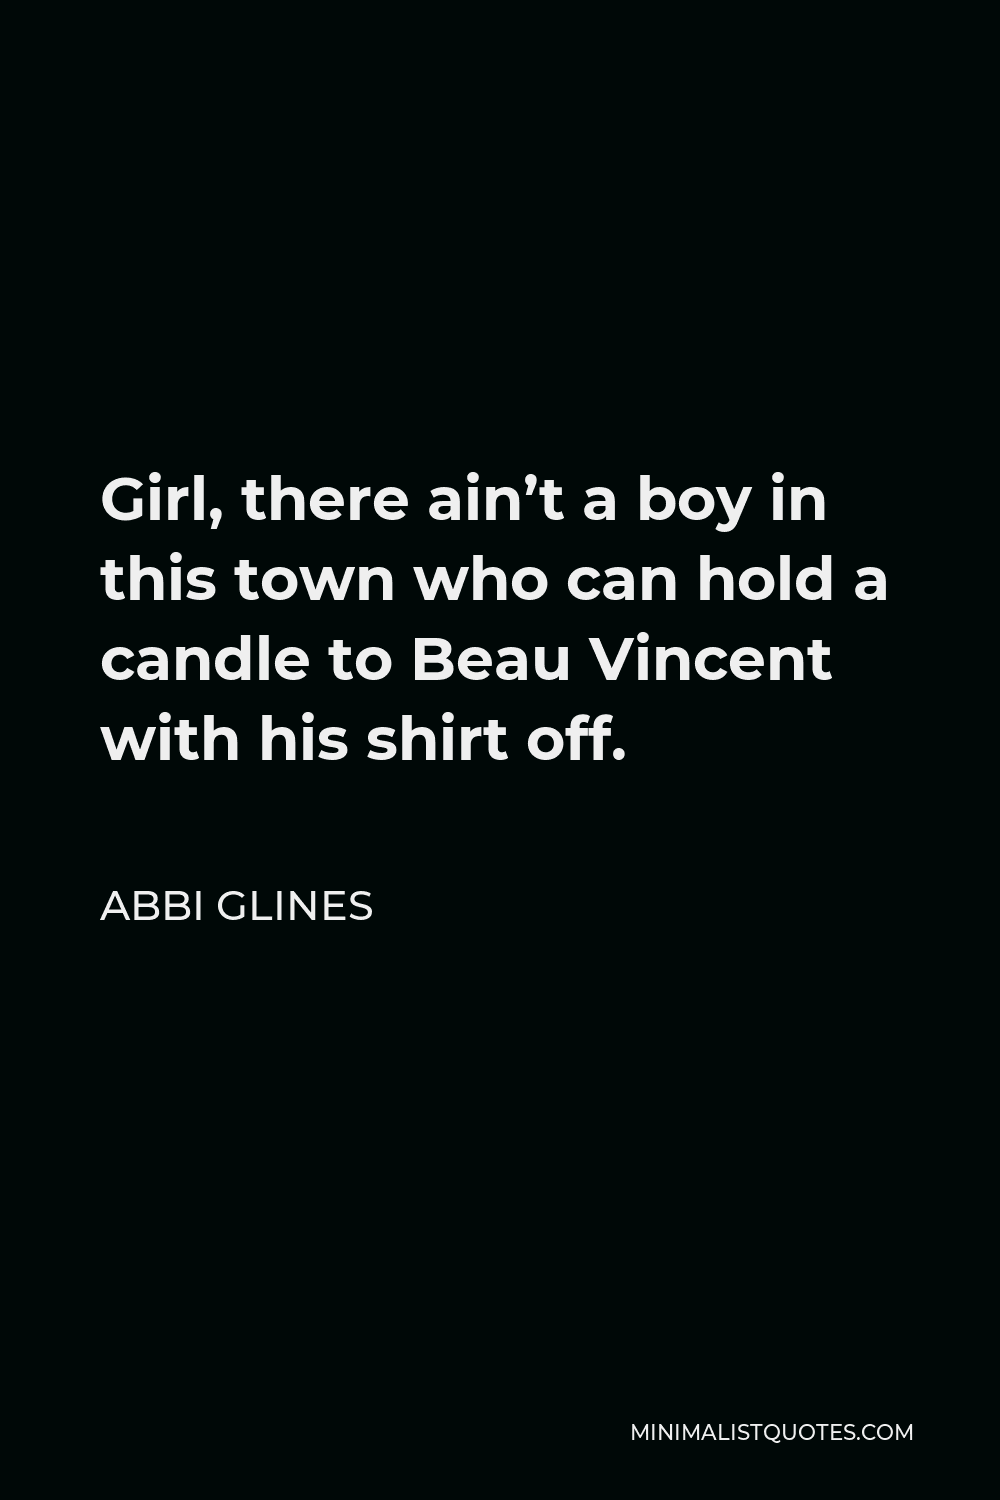 Abbi Glines Quote - Girl, there ain’t a boy in this town who can hold a candle to Beau Vincent with his shirt off.